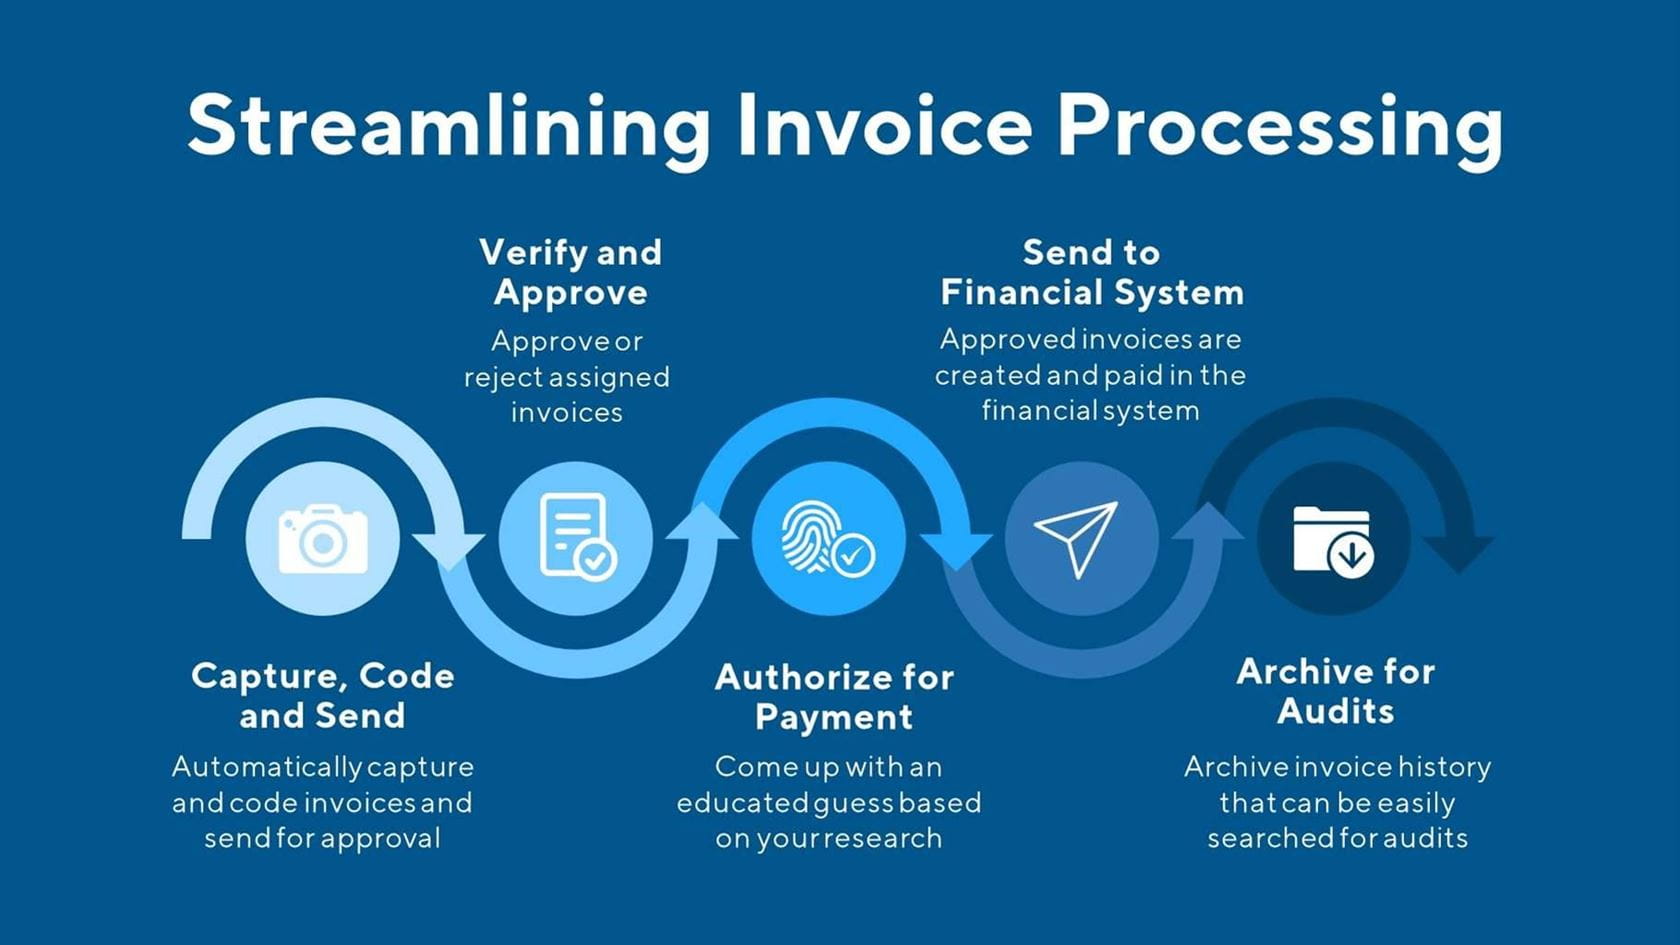 Ask yourself, “What should I look for when approving invoices?”